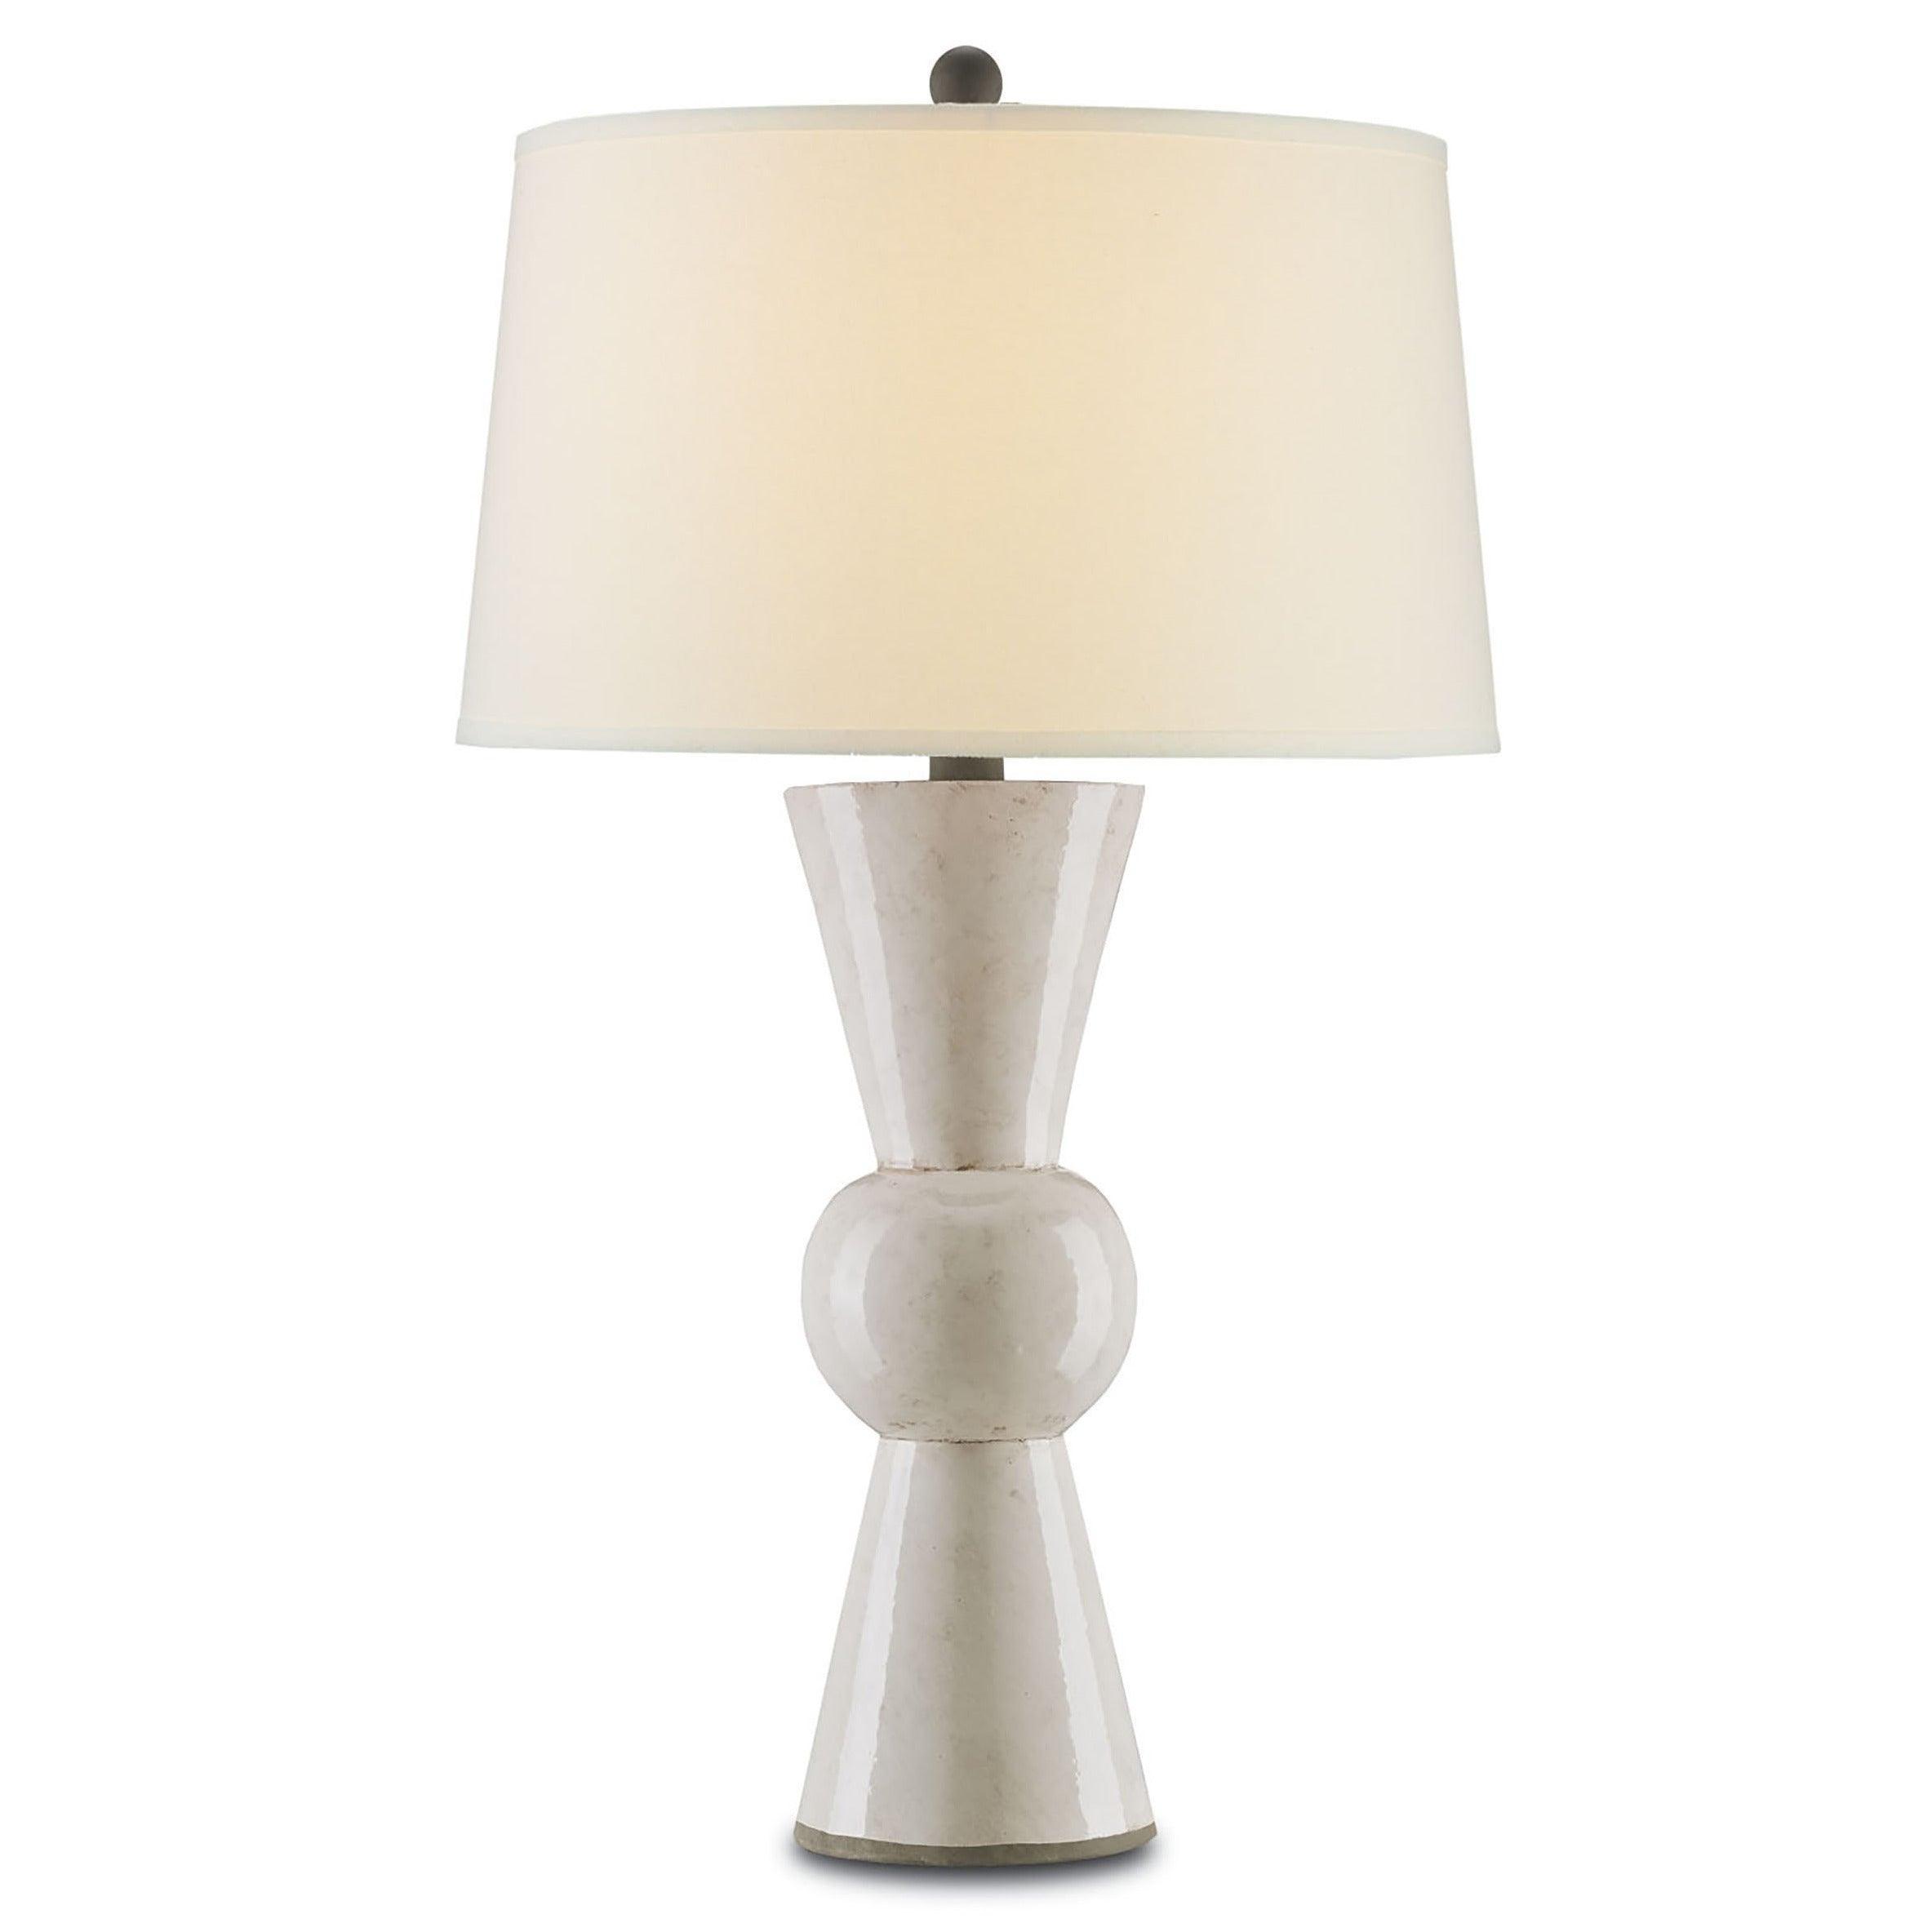 Currey and Company - Upbeat Table Lamp - 6198 | Montreal Lighting & Hardware